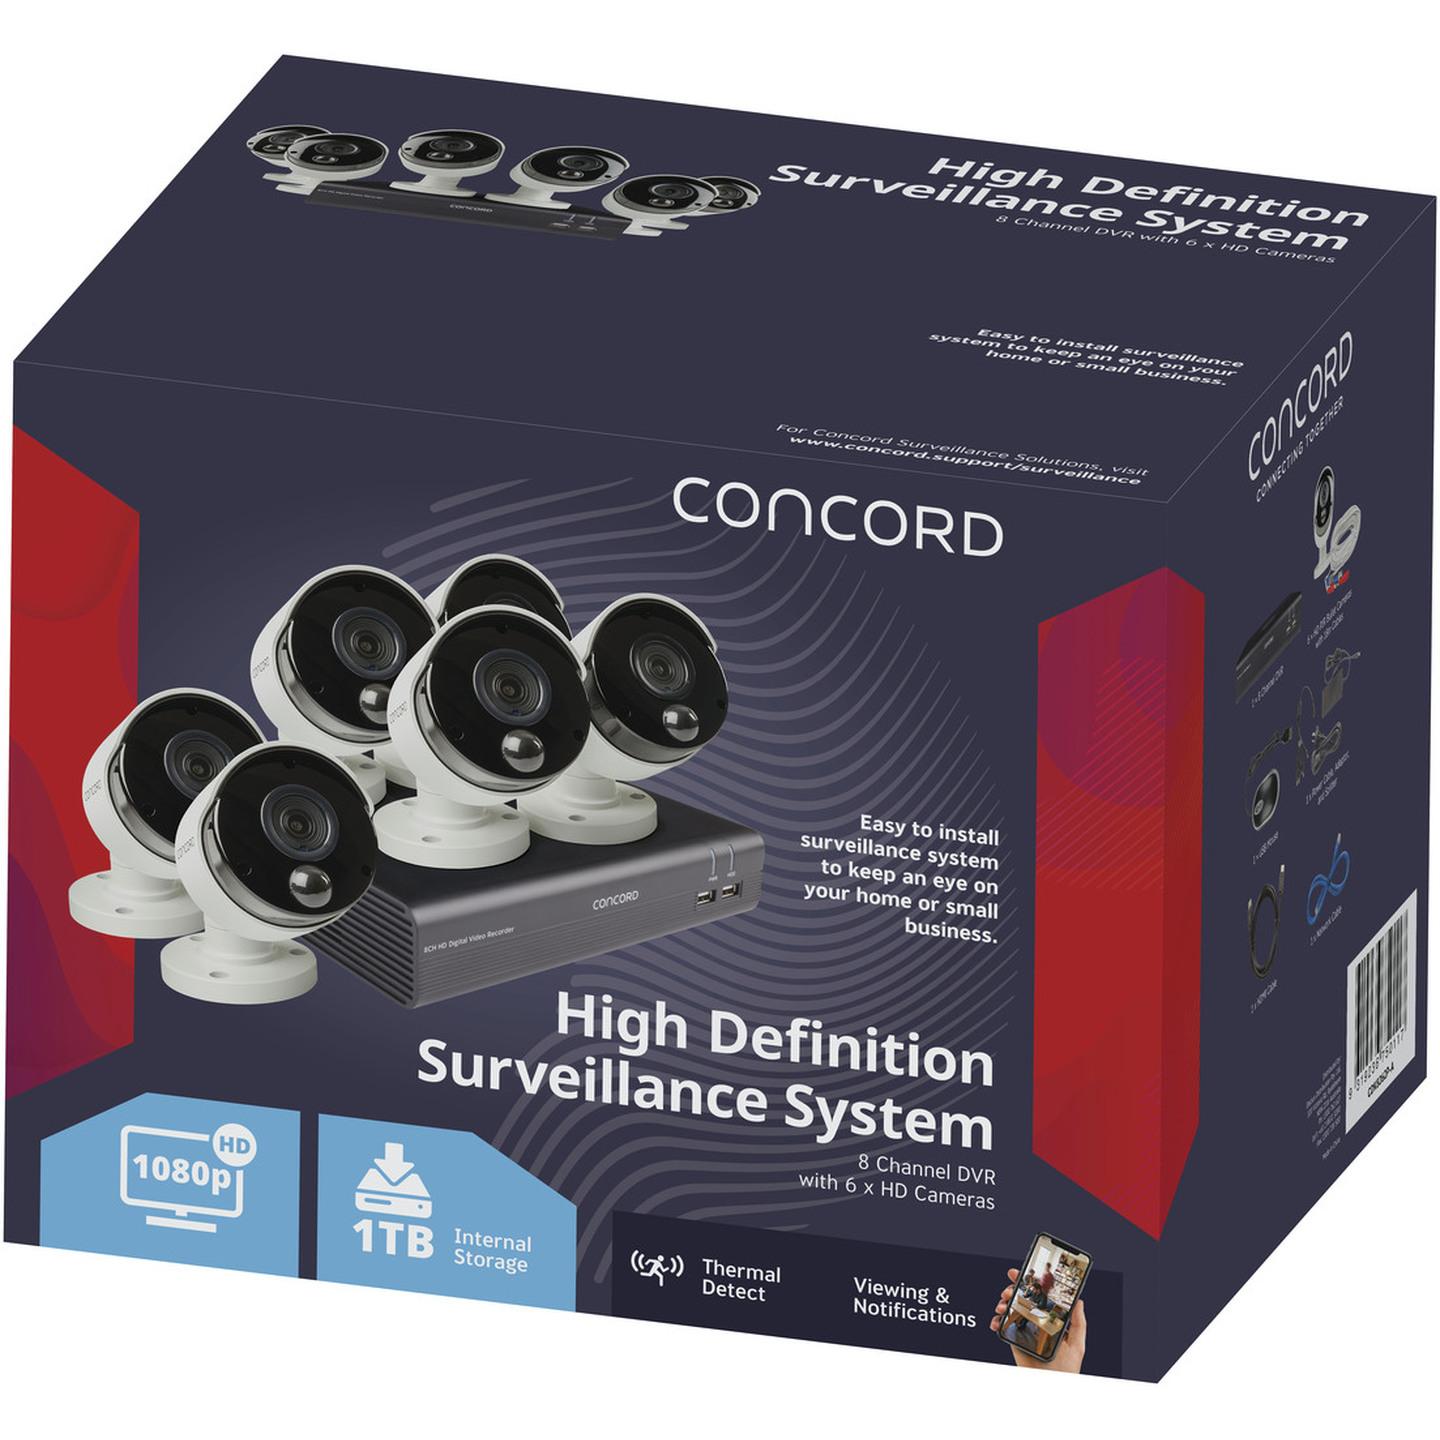 Concord 8 Channel HD DVR Package - 6x1080p Cameras